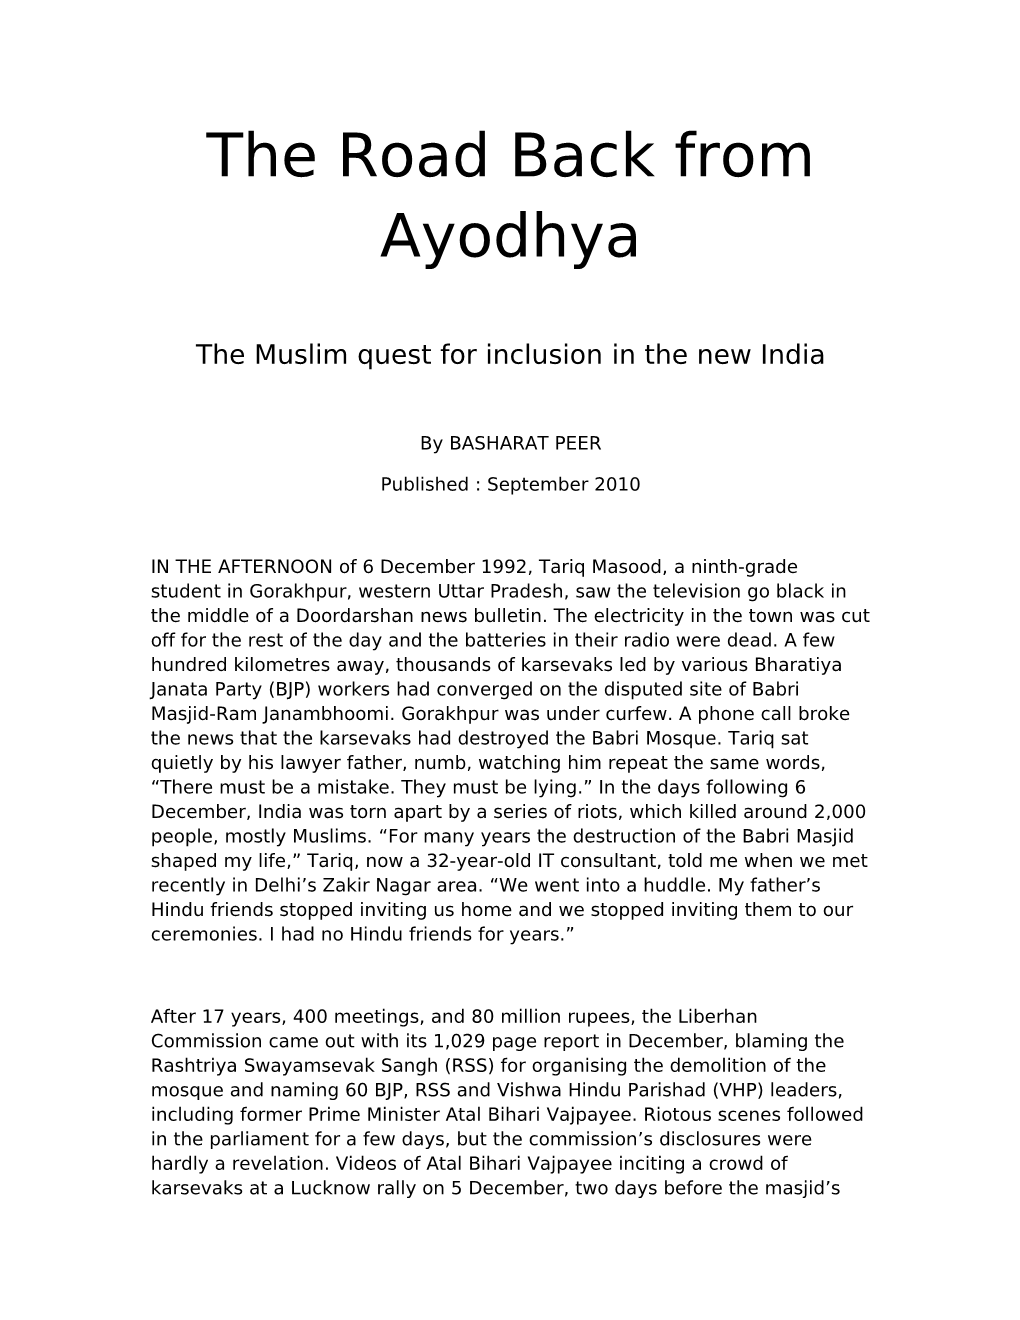 The Road Back from Ayodhya